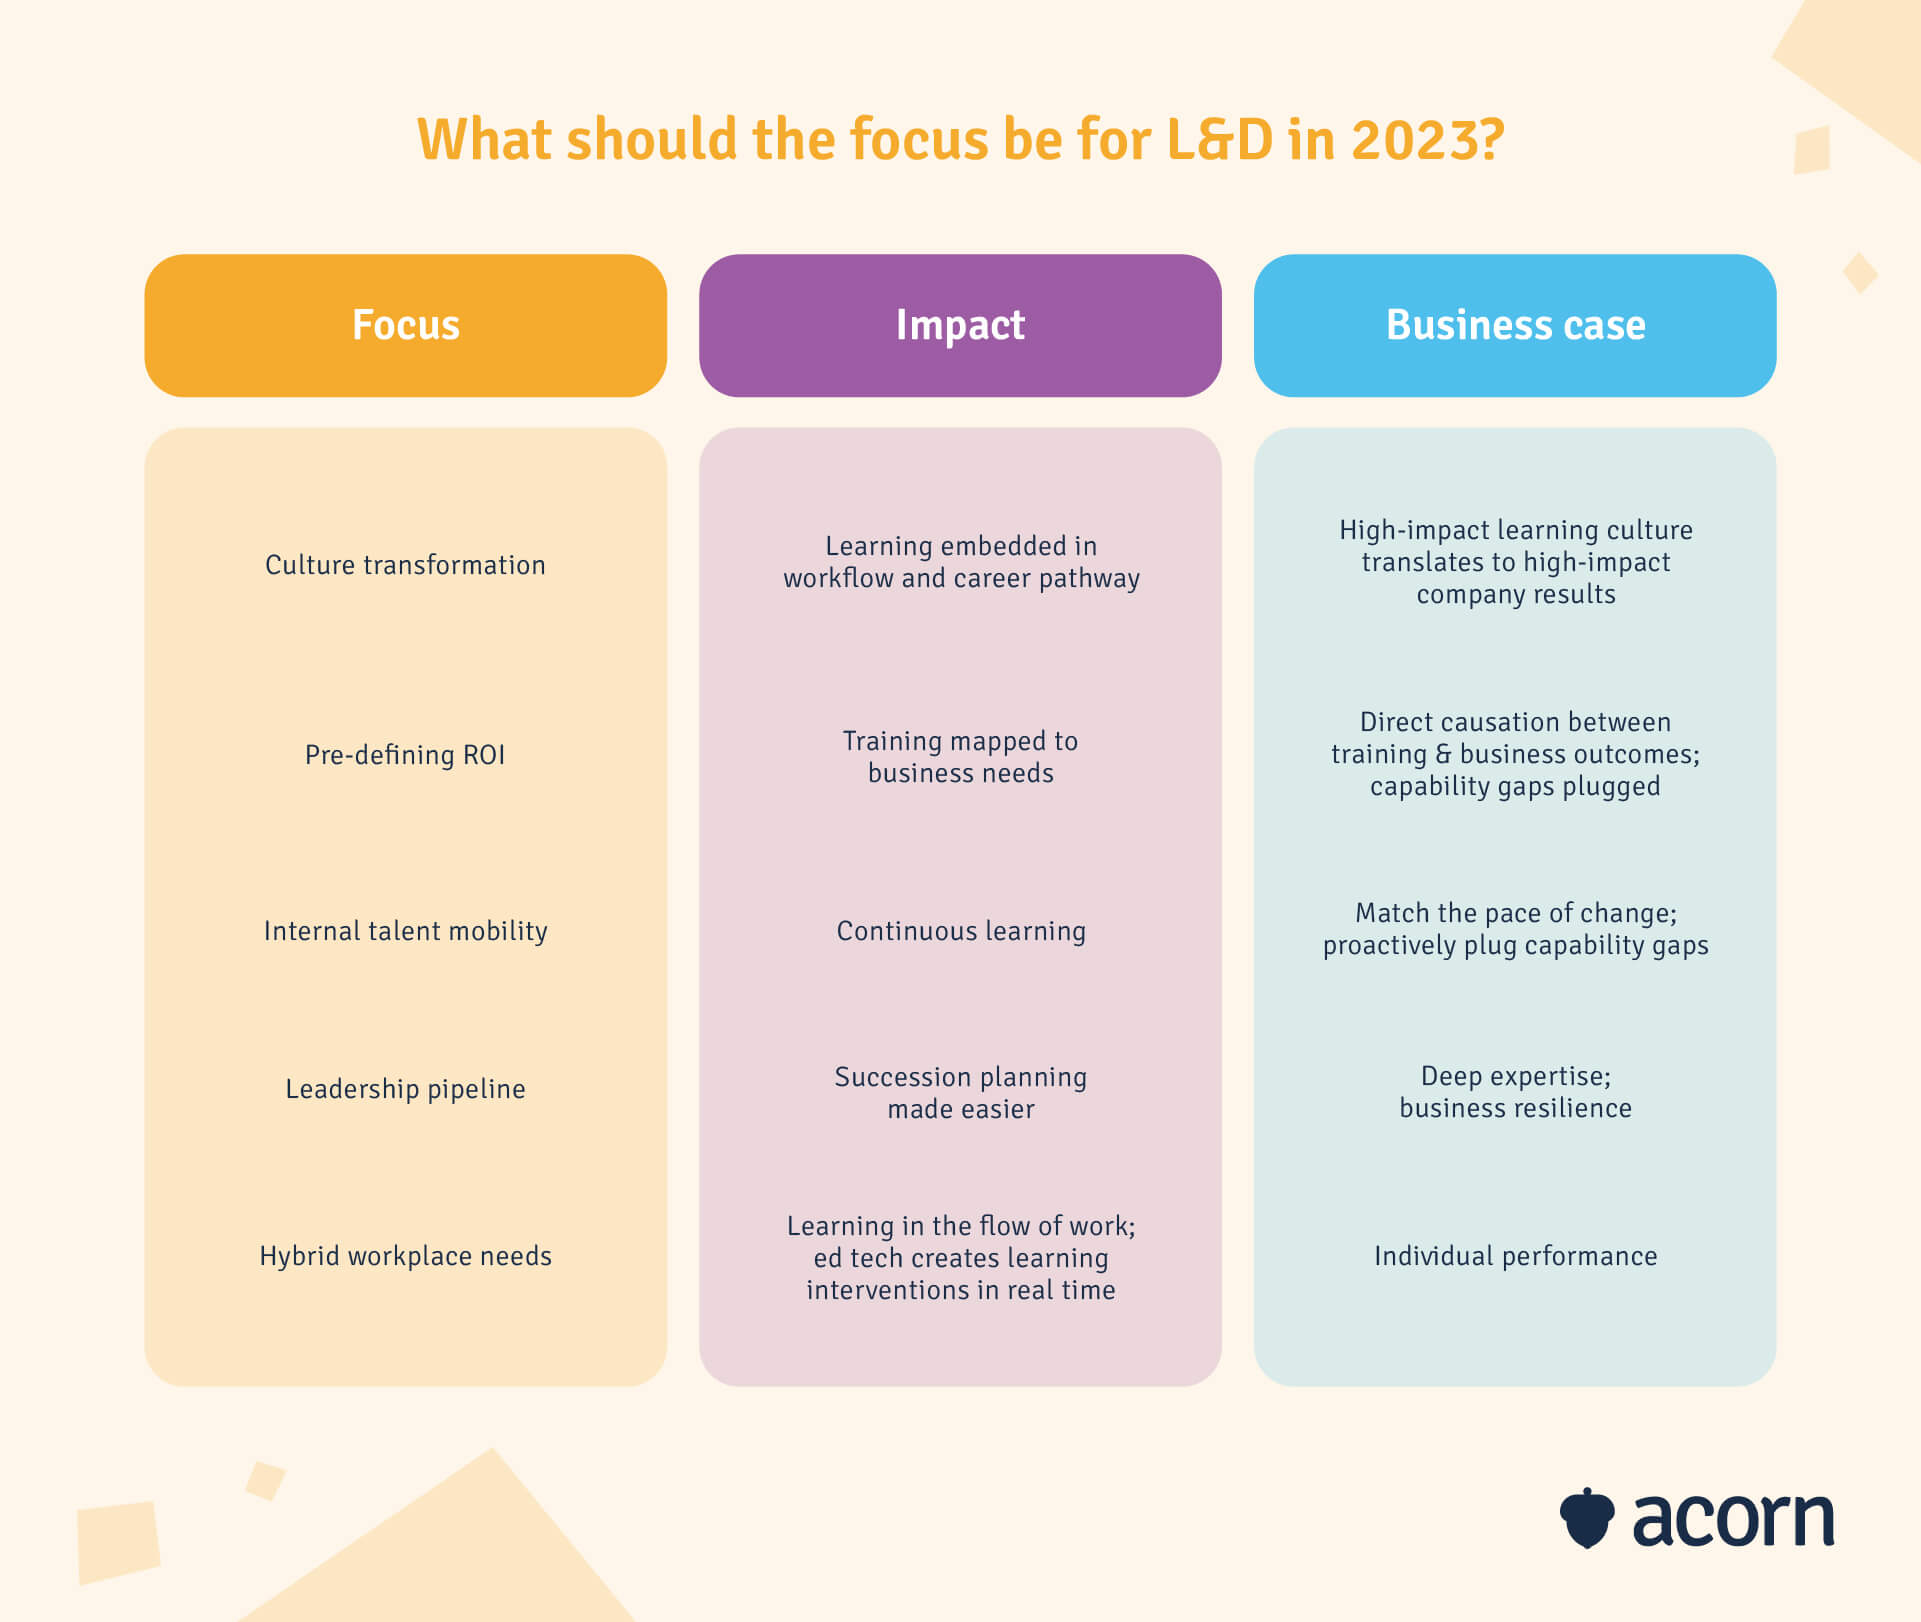 table showing how to translate L&D focus to impact and business case